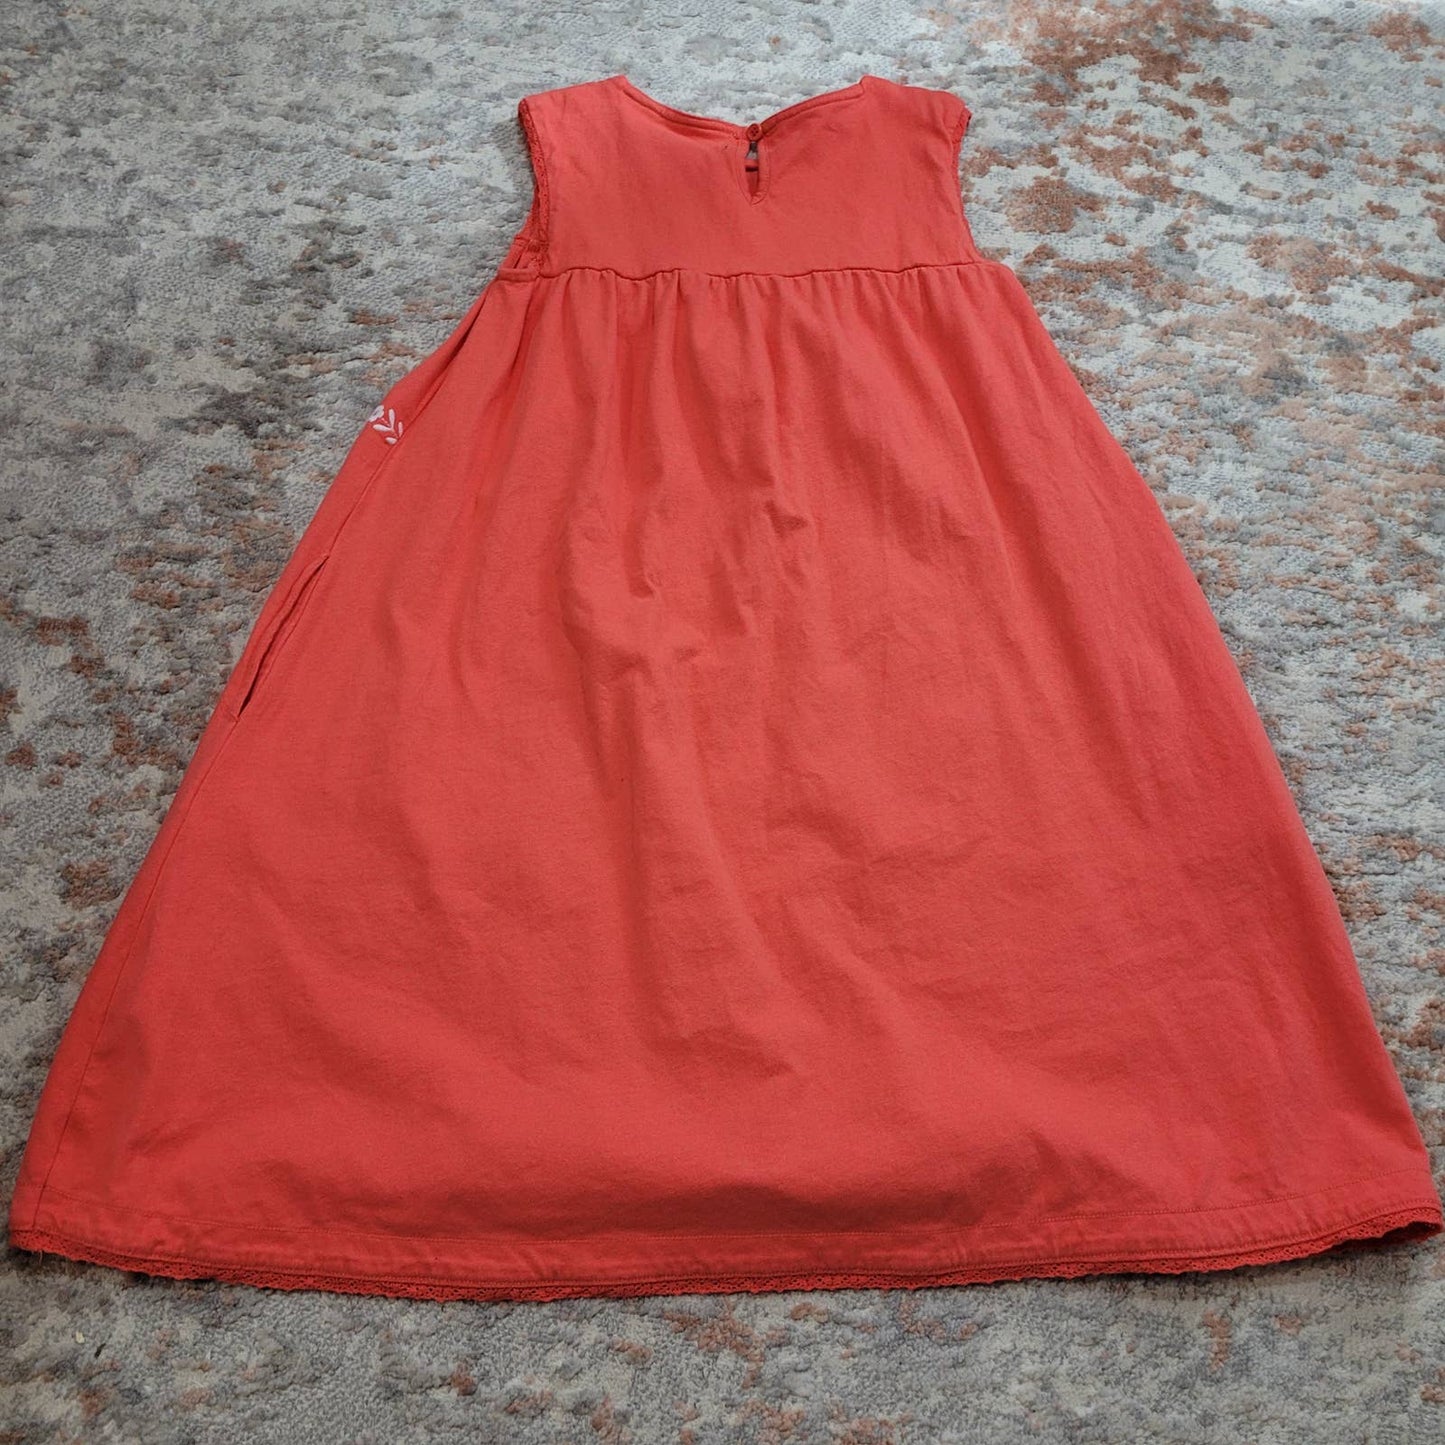 Mini Boden Coral Dress with Embroidered Monkey Pattern - Size 11-12